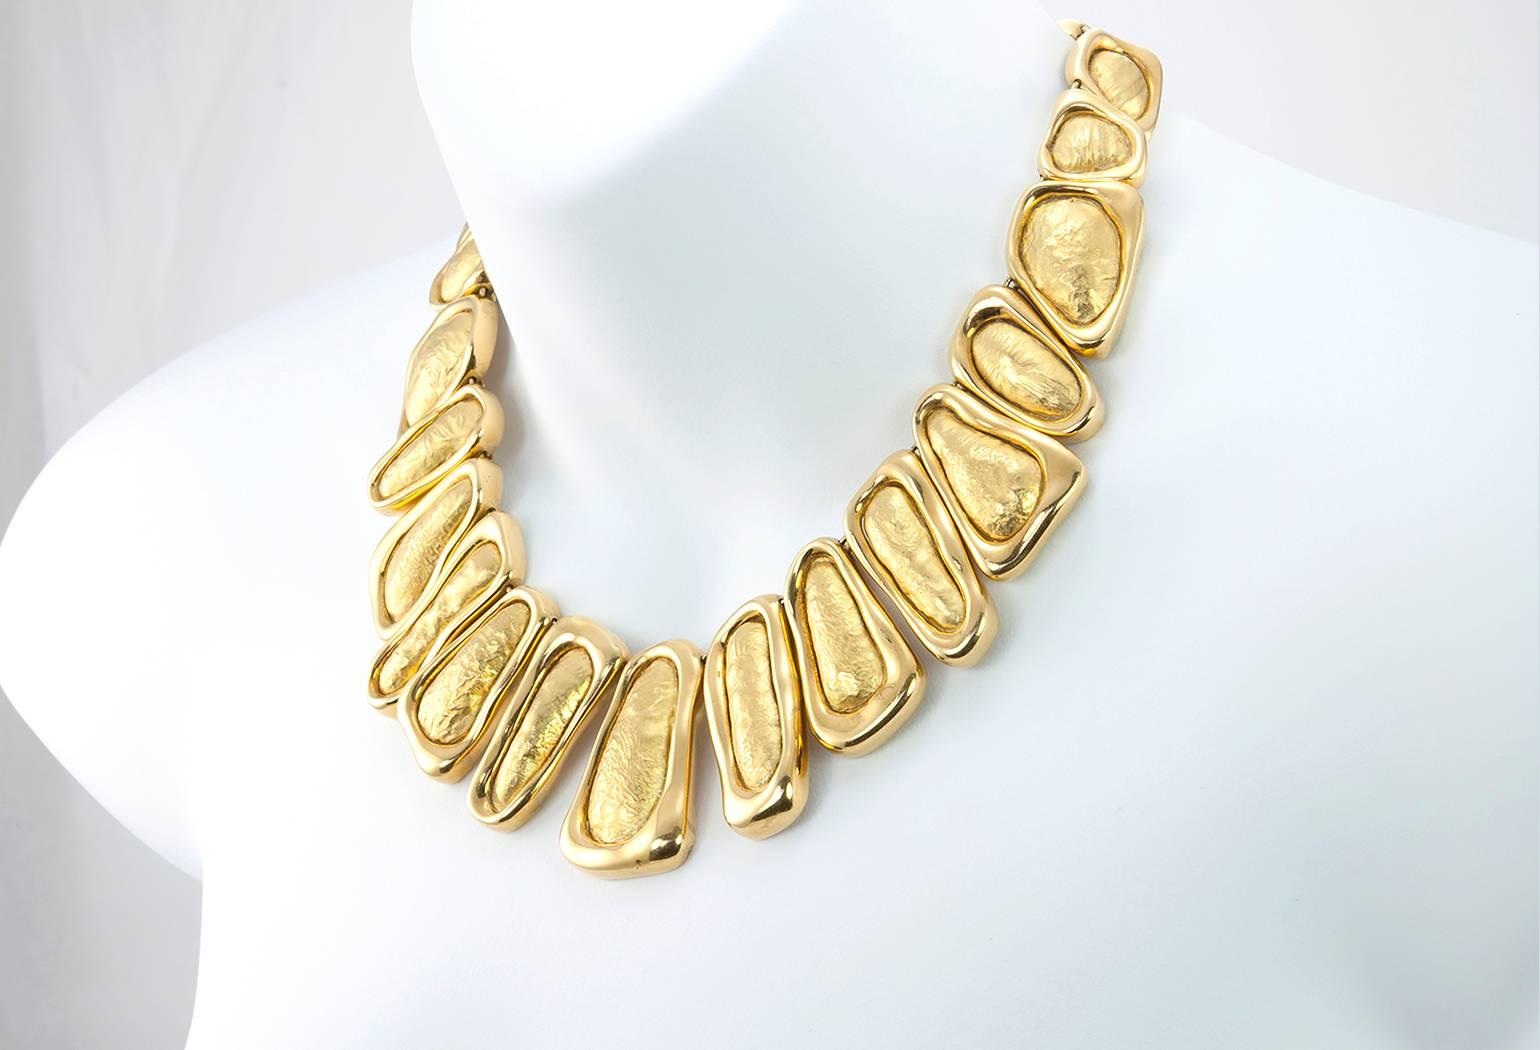 Tiffany & Co. Abstract Gold Necklace and Earring Set In Excellent Condition For Sale In Los Angeles, CA